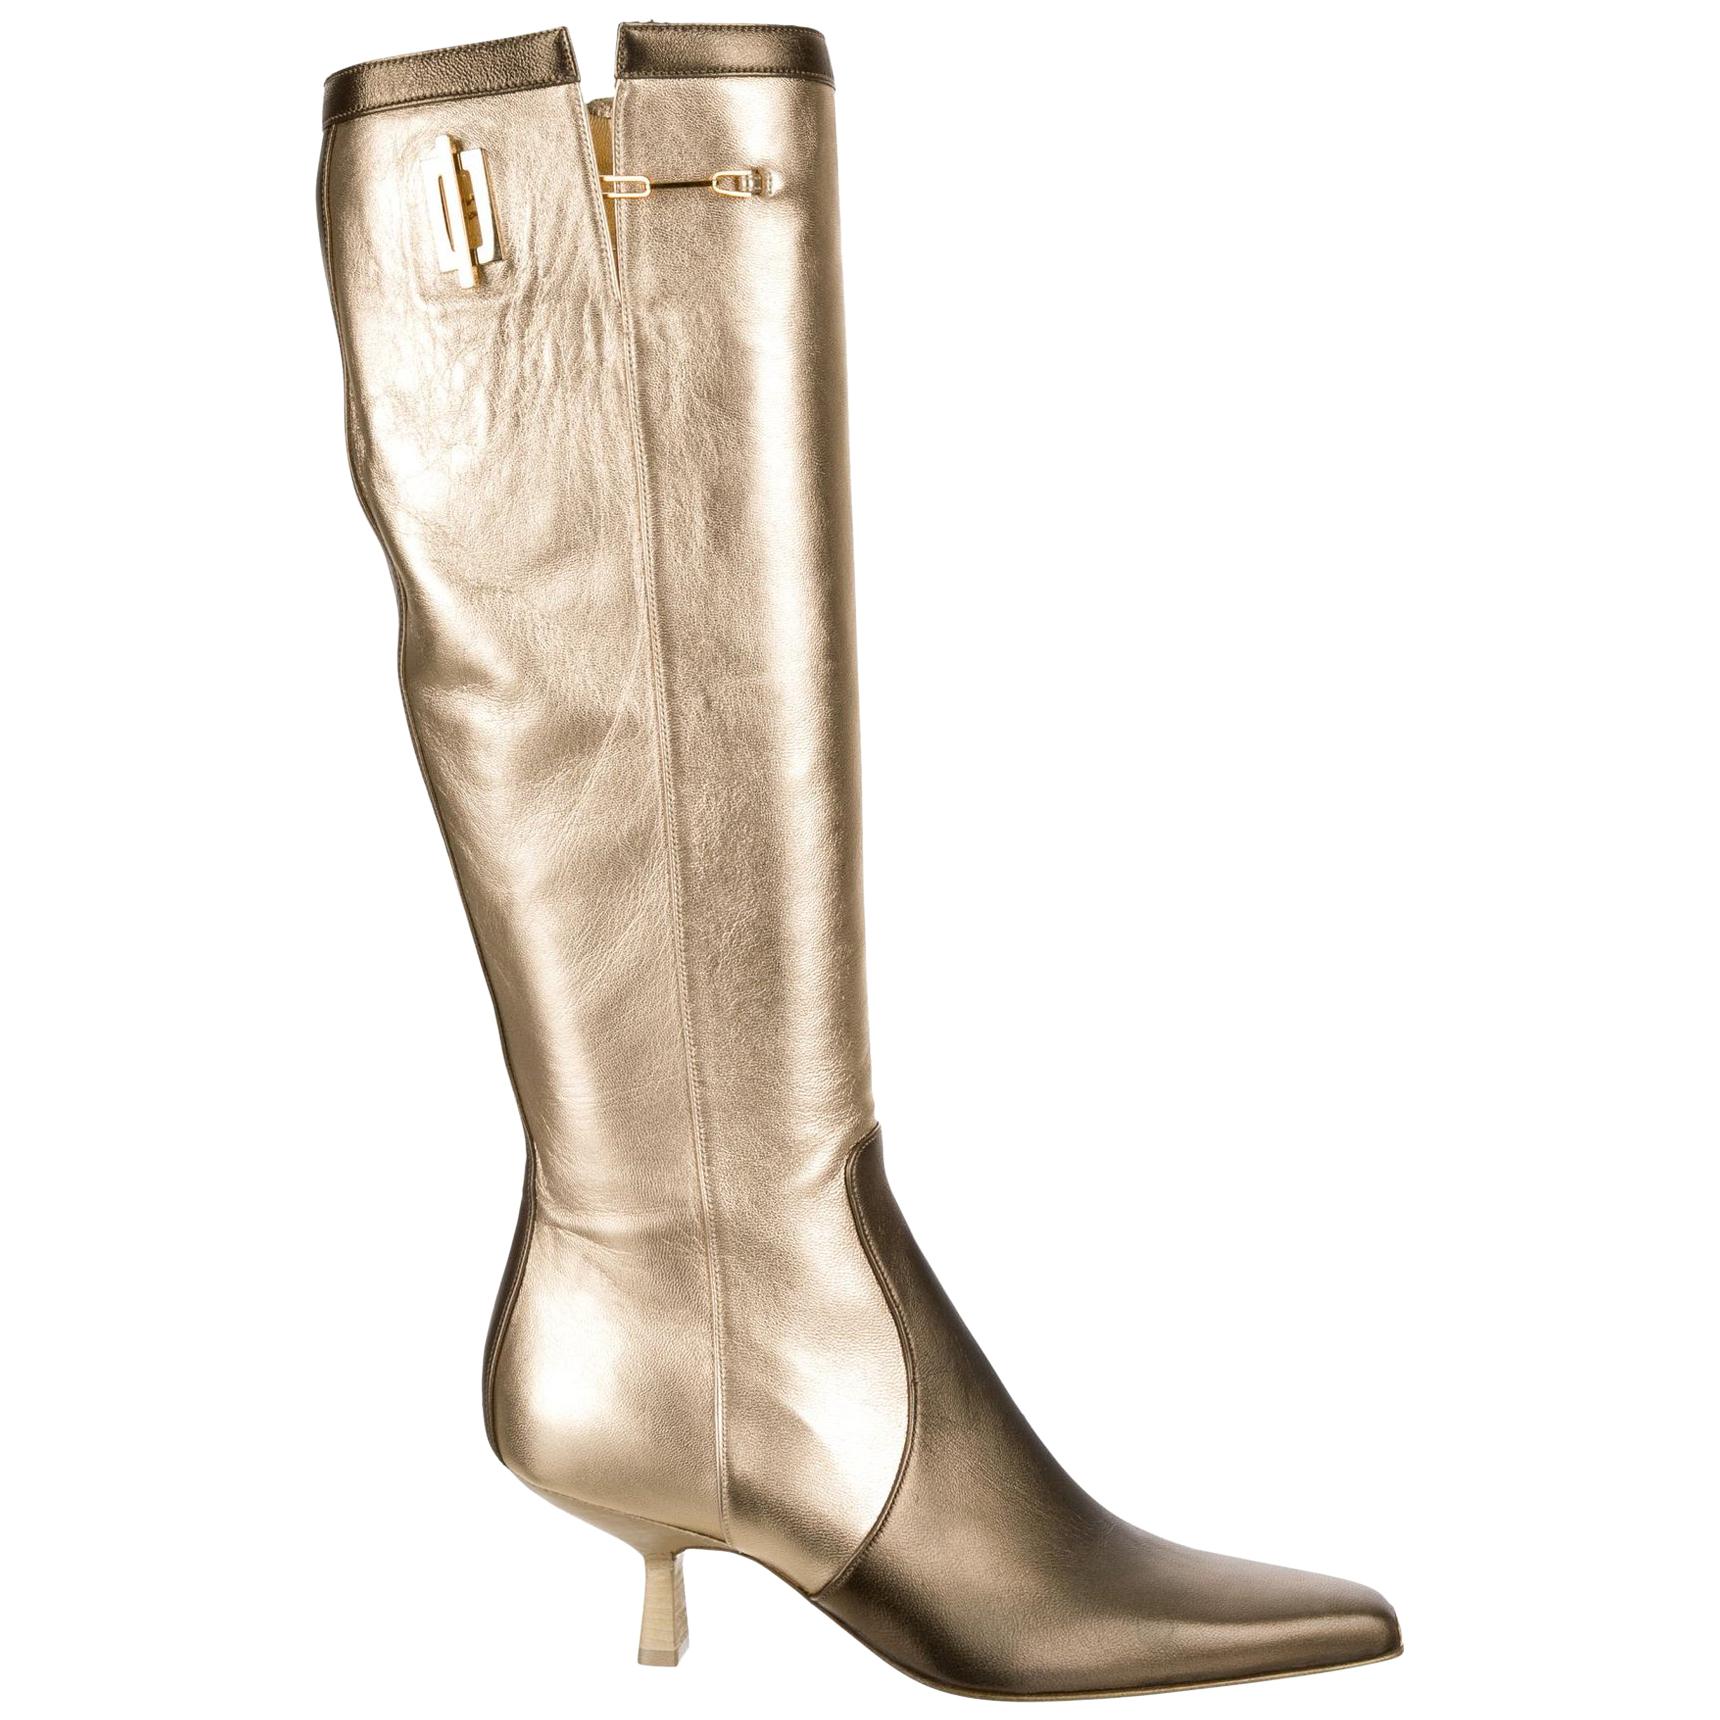 Museum Piece - Gucci by Tom Ford Fall 2000 Two Tone Gold & Bronze Boots